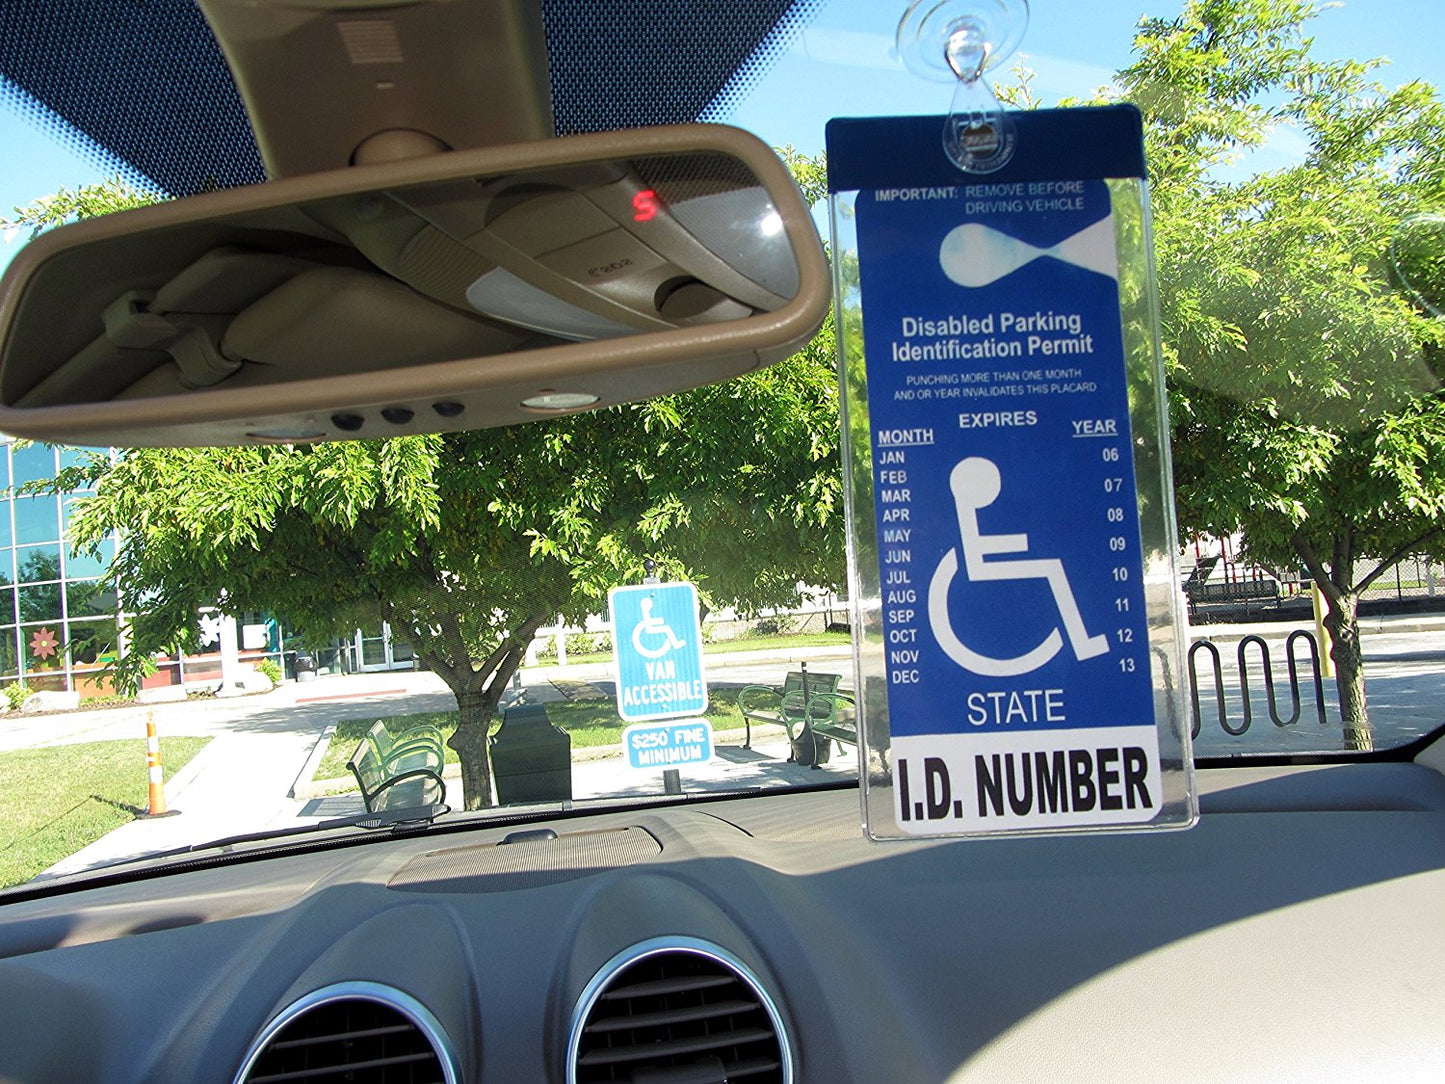 Universal Handicap Placard for Disabled Person